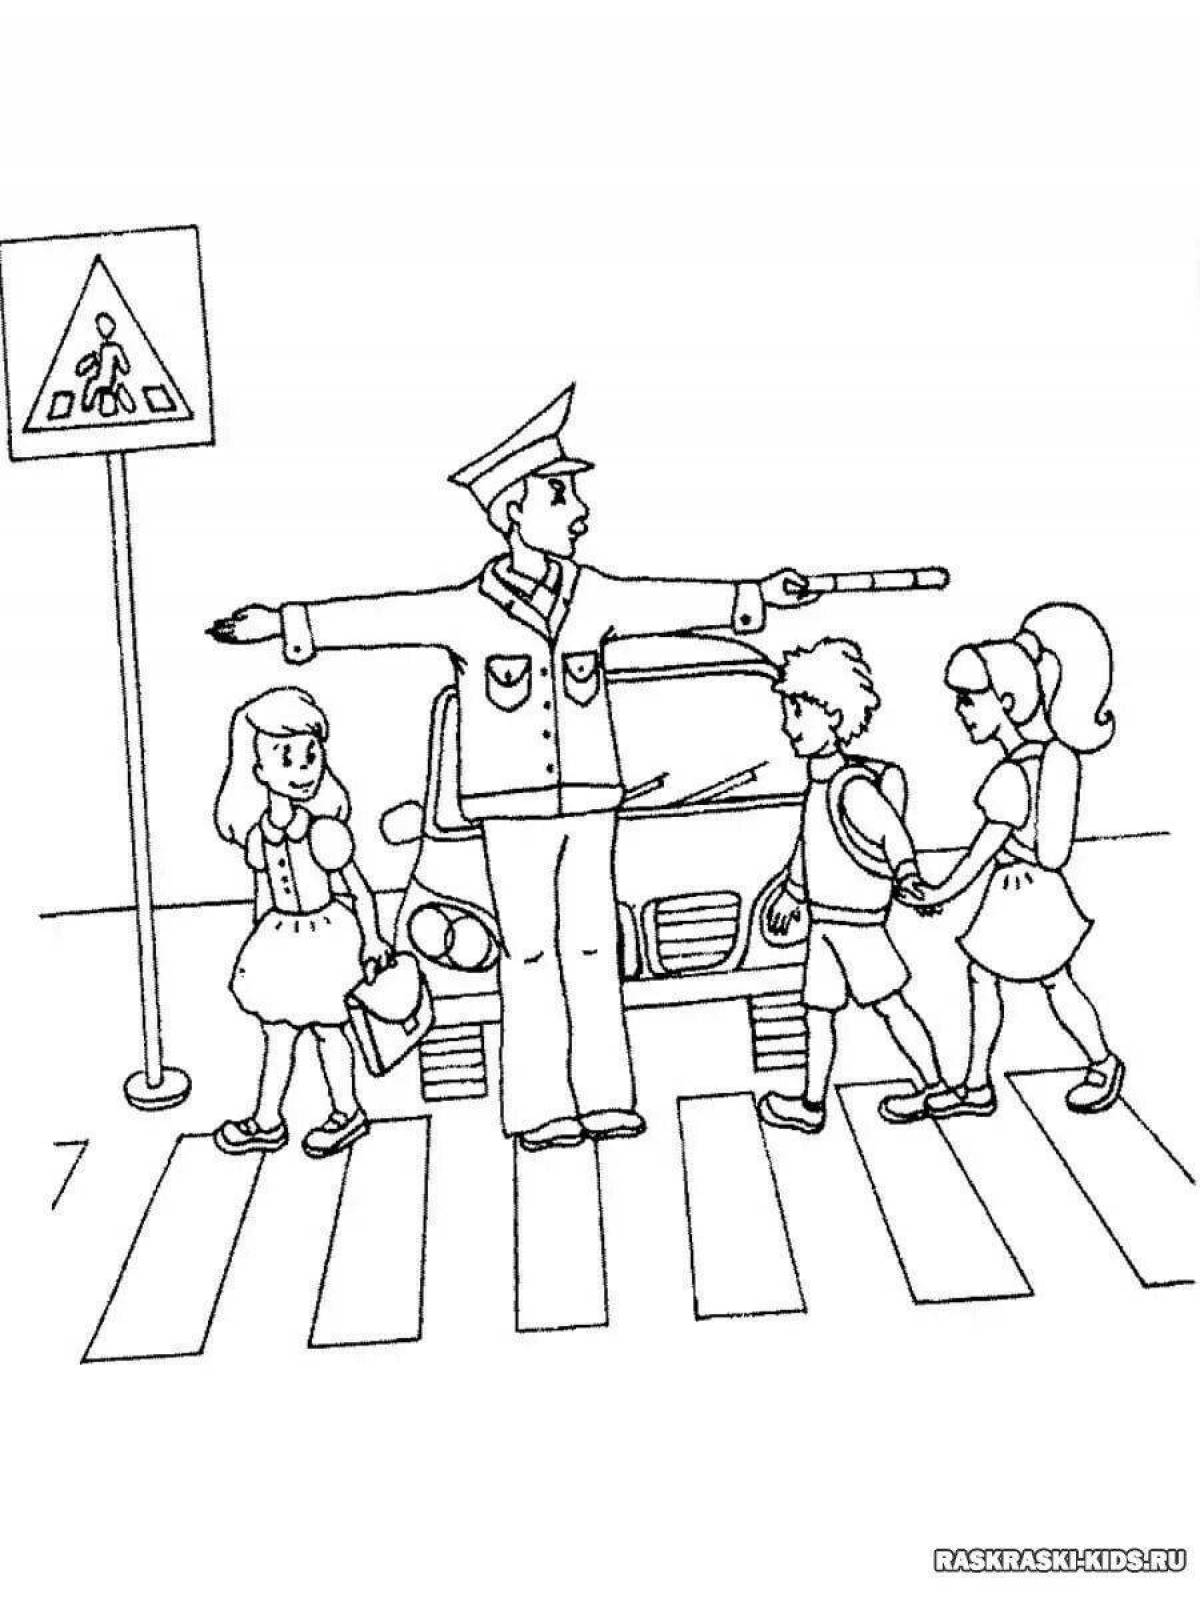 Fun coloring book according to the rules of the road in kindergarten